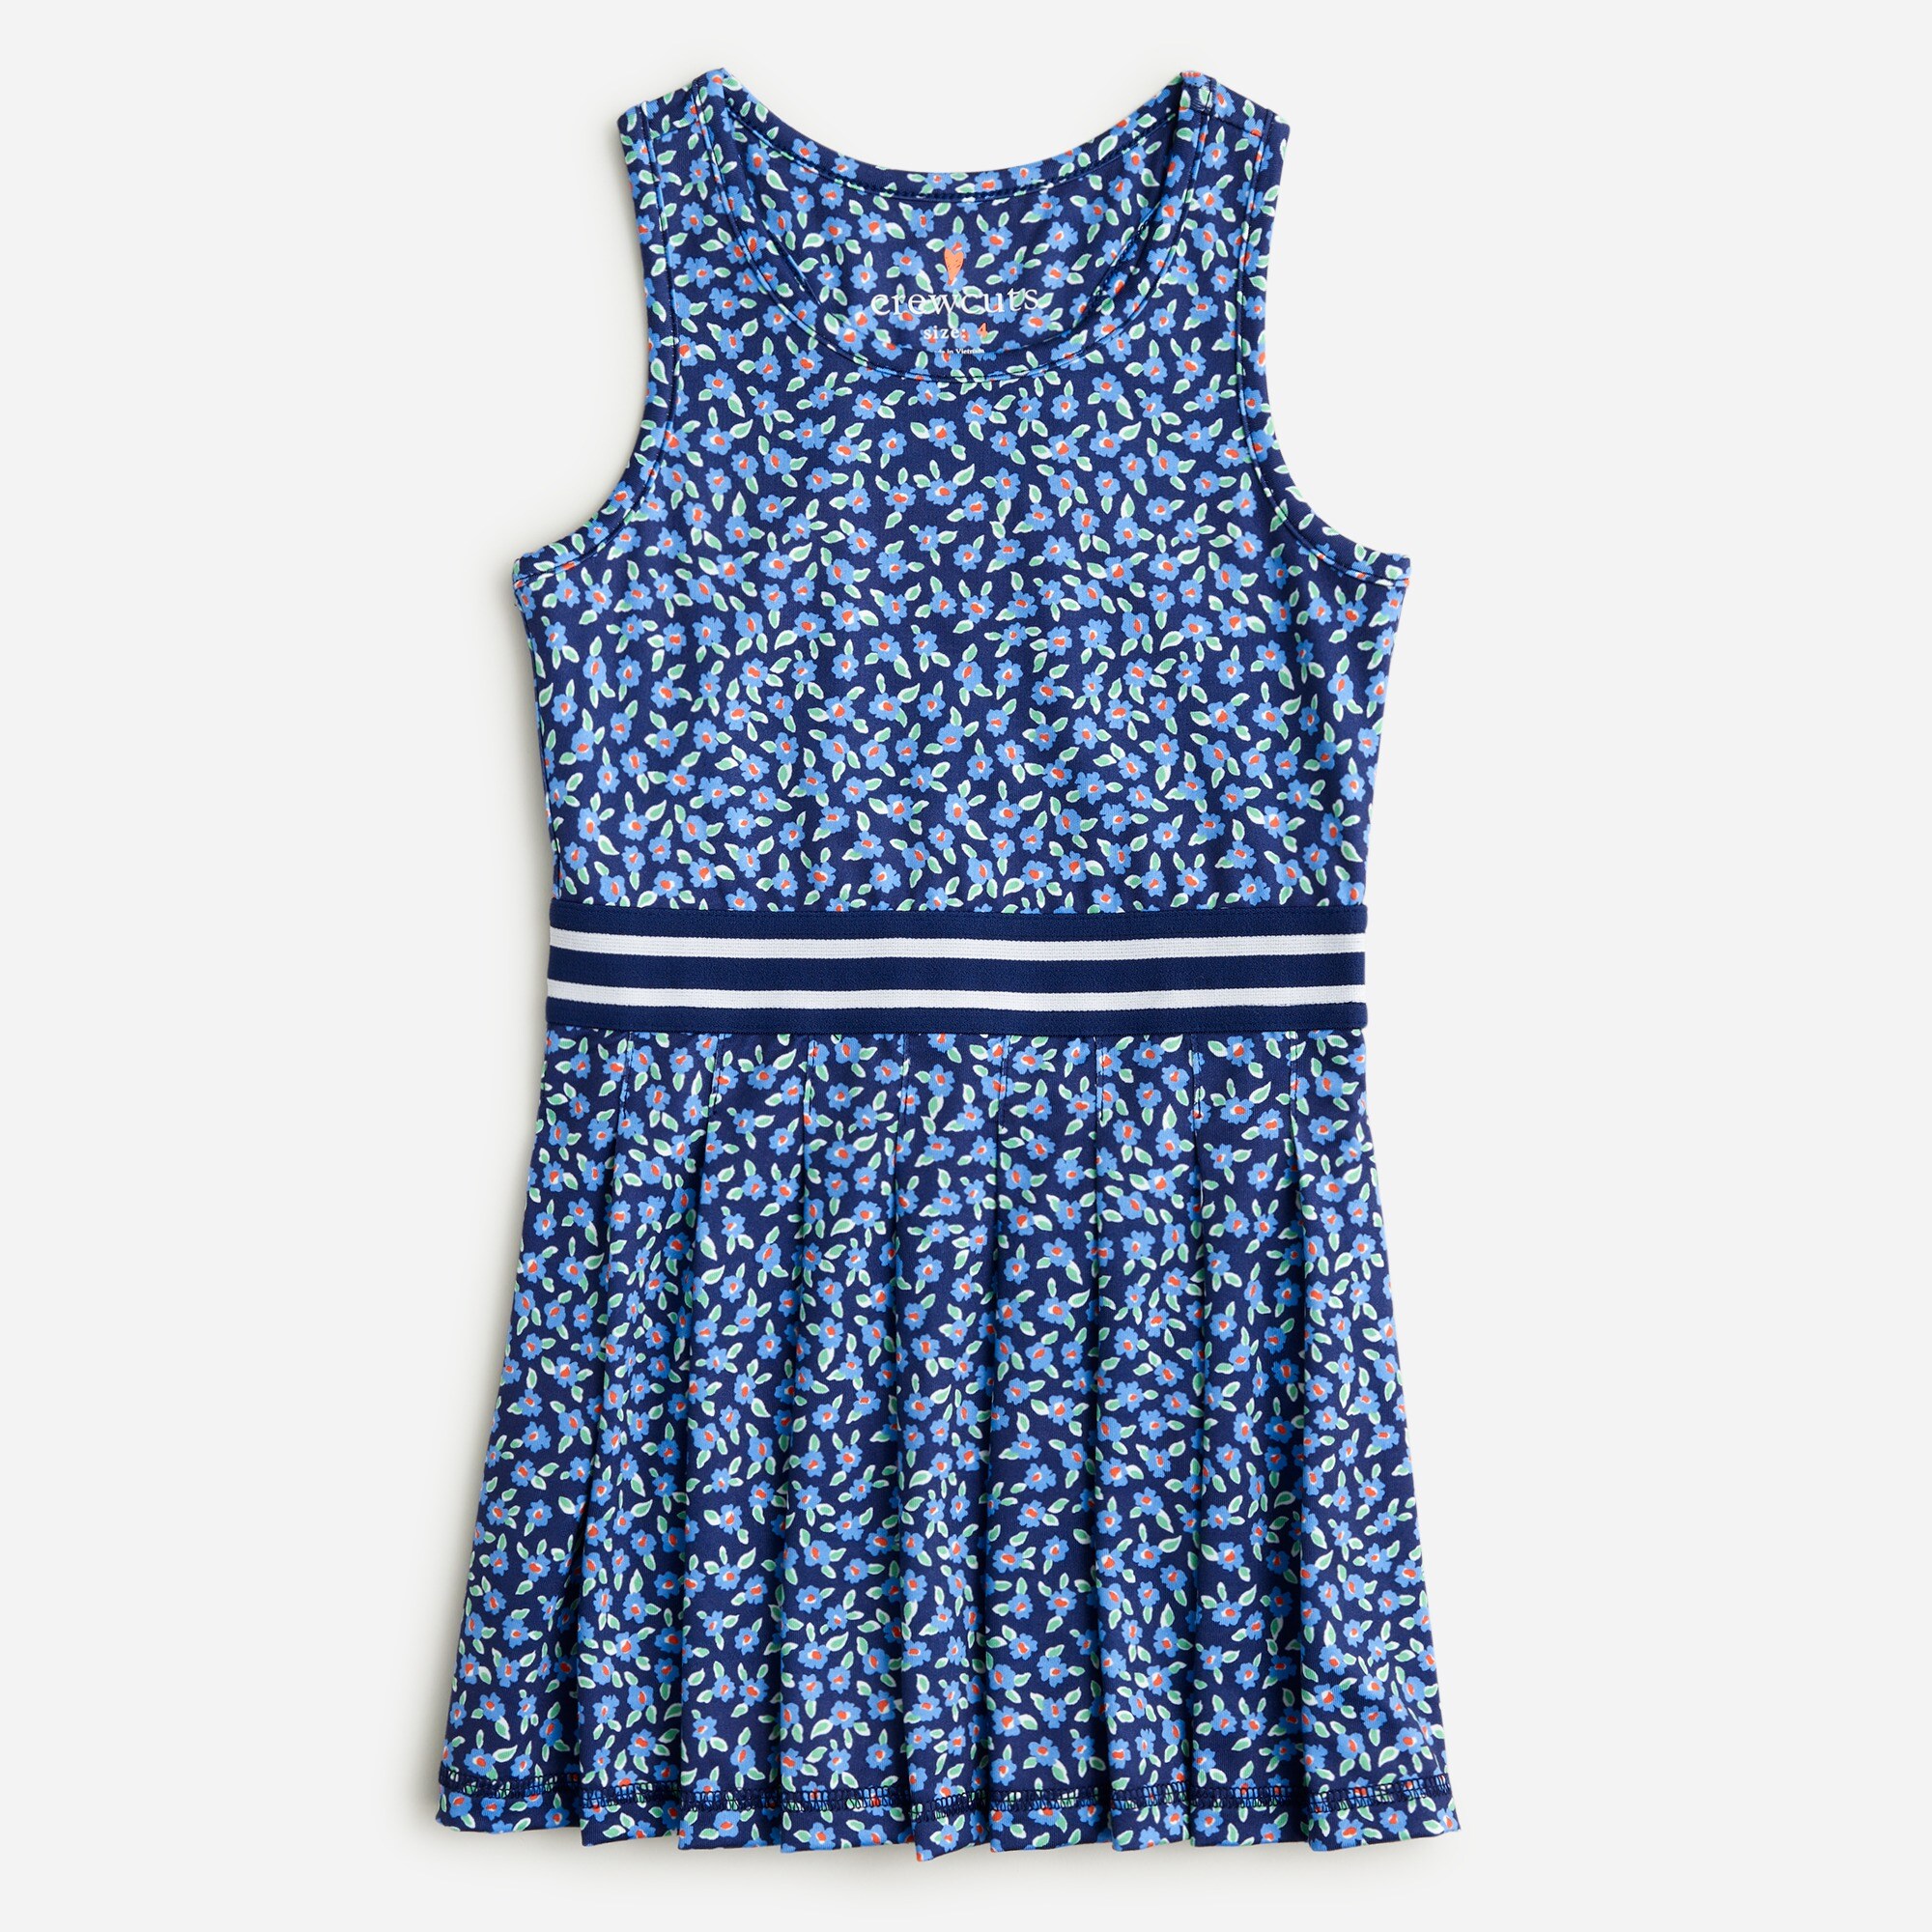  Girls' active pleated dress